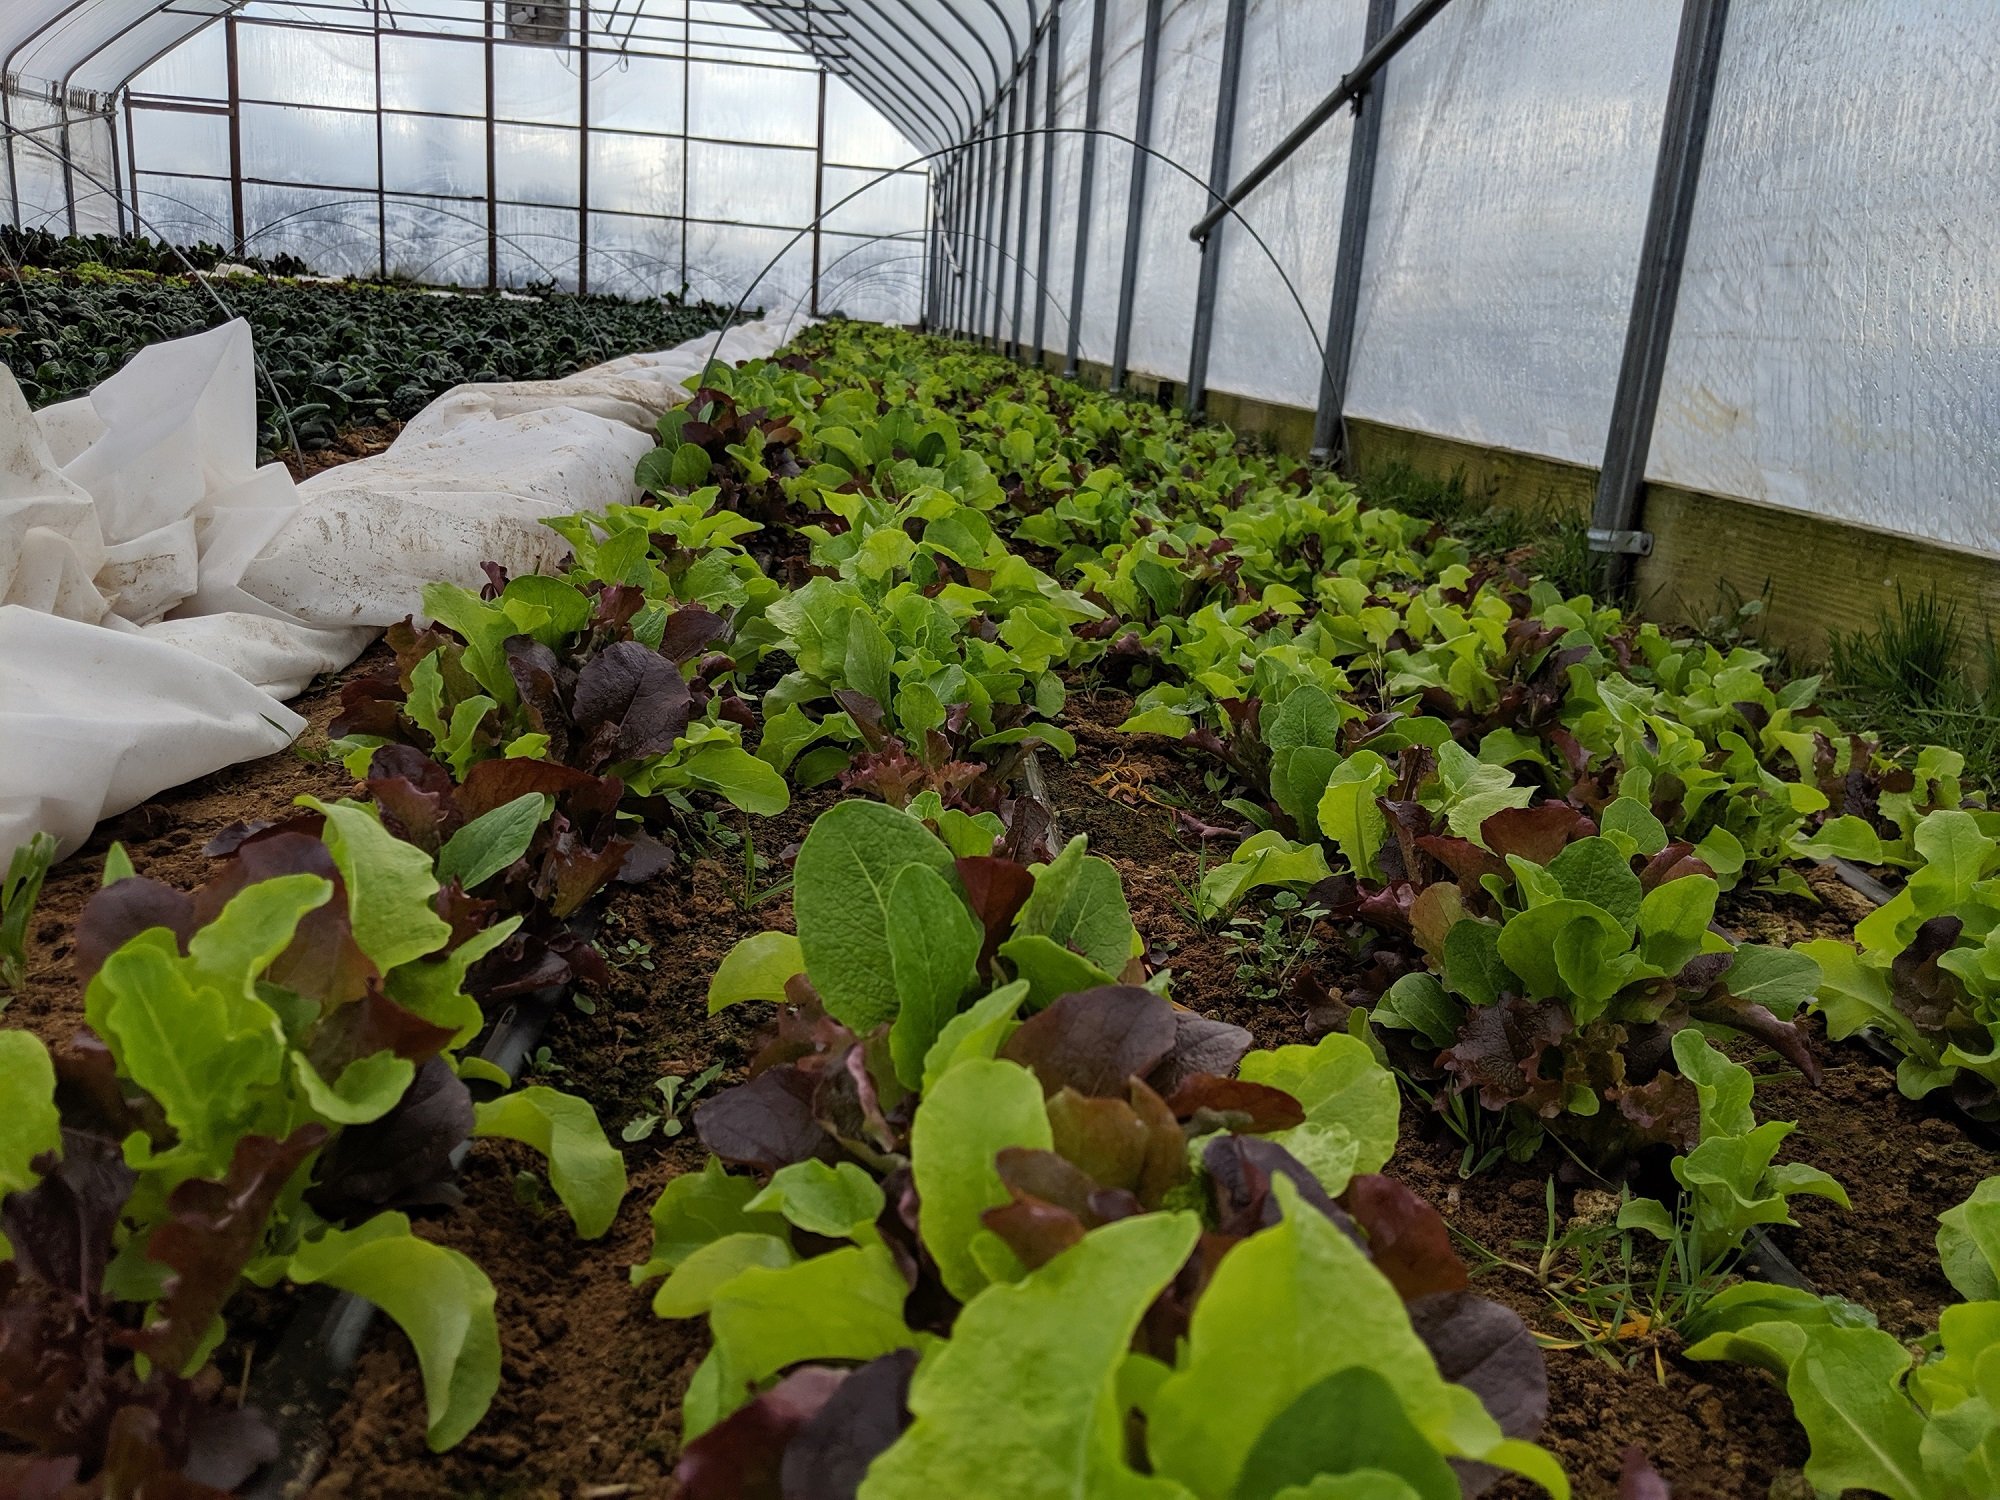 Previous Happening: Farm Happenings for January 18, 2020